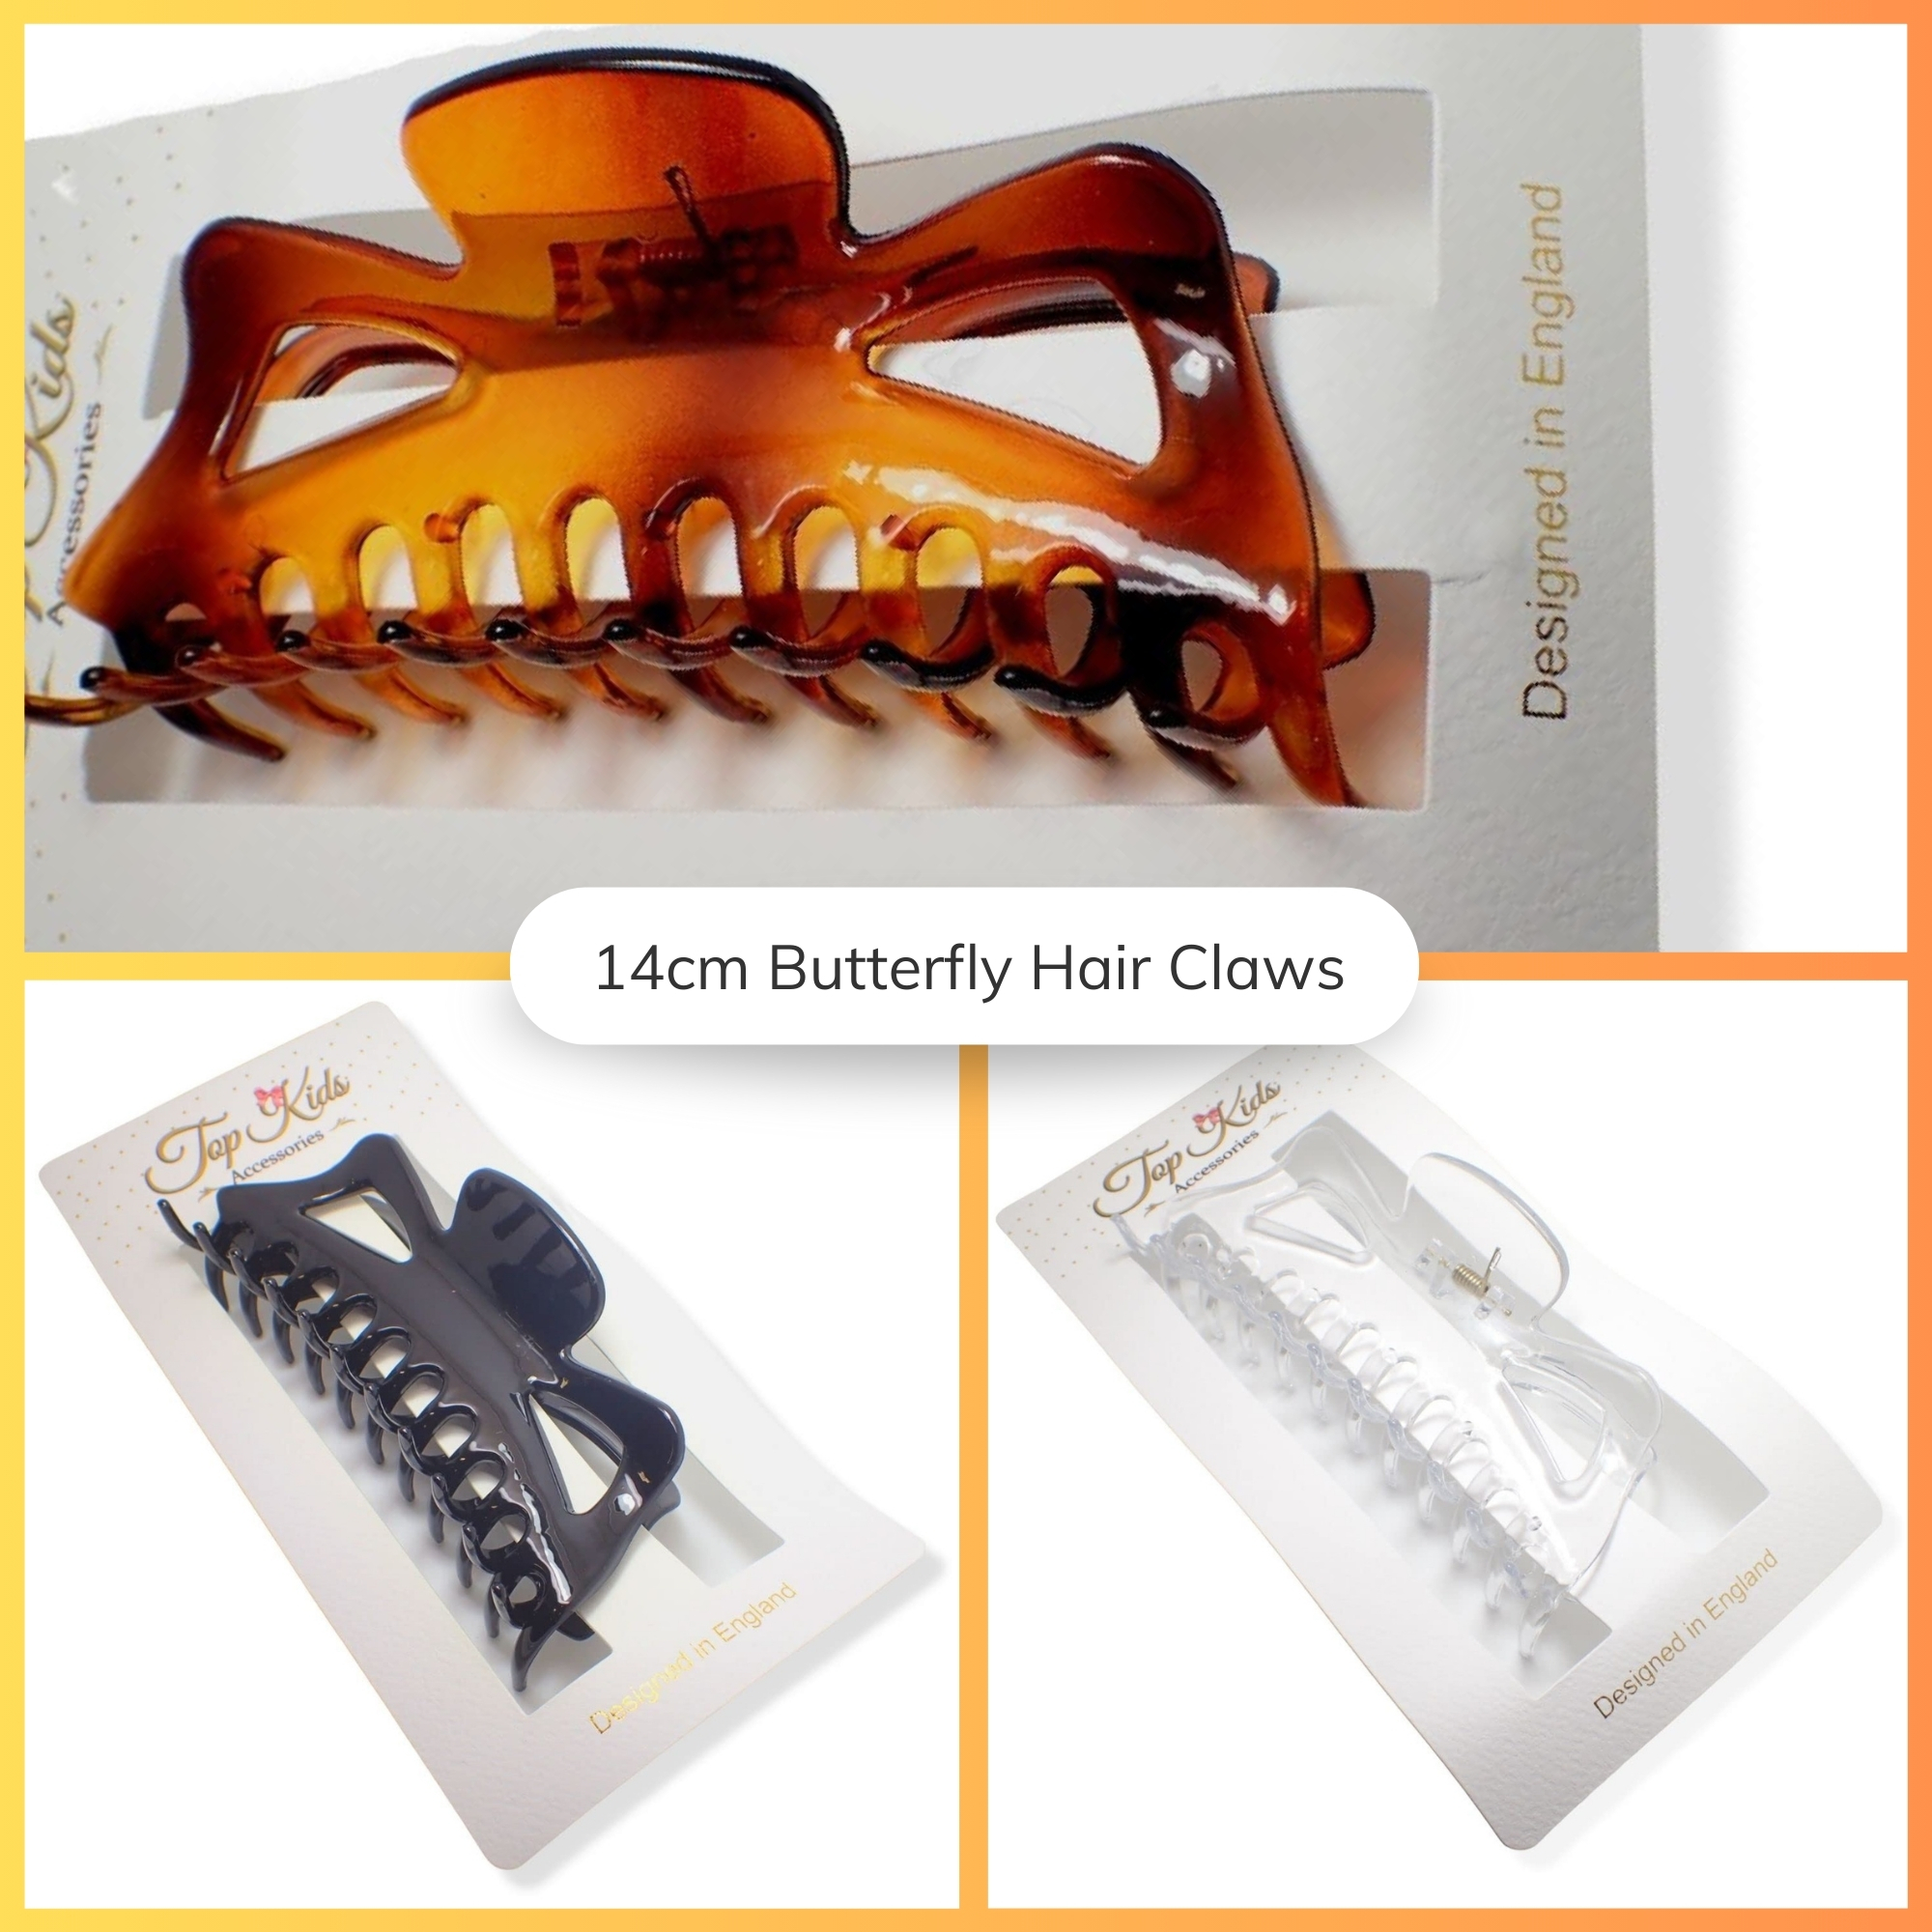 240 Large Hair Claw - 14cm Long - Tort Brown, Clear and Black